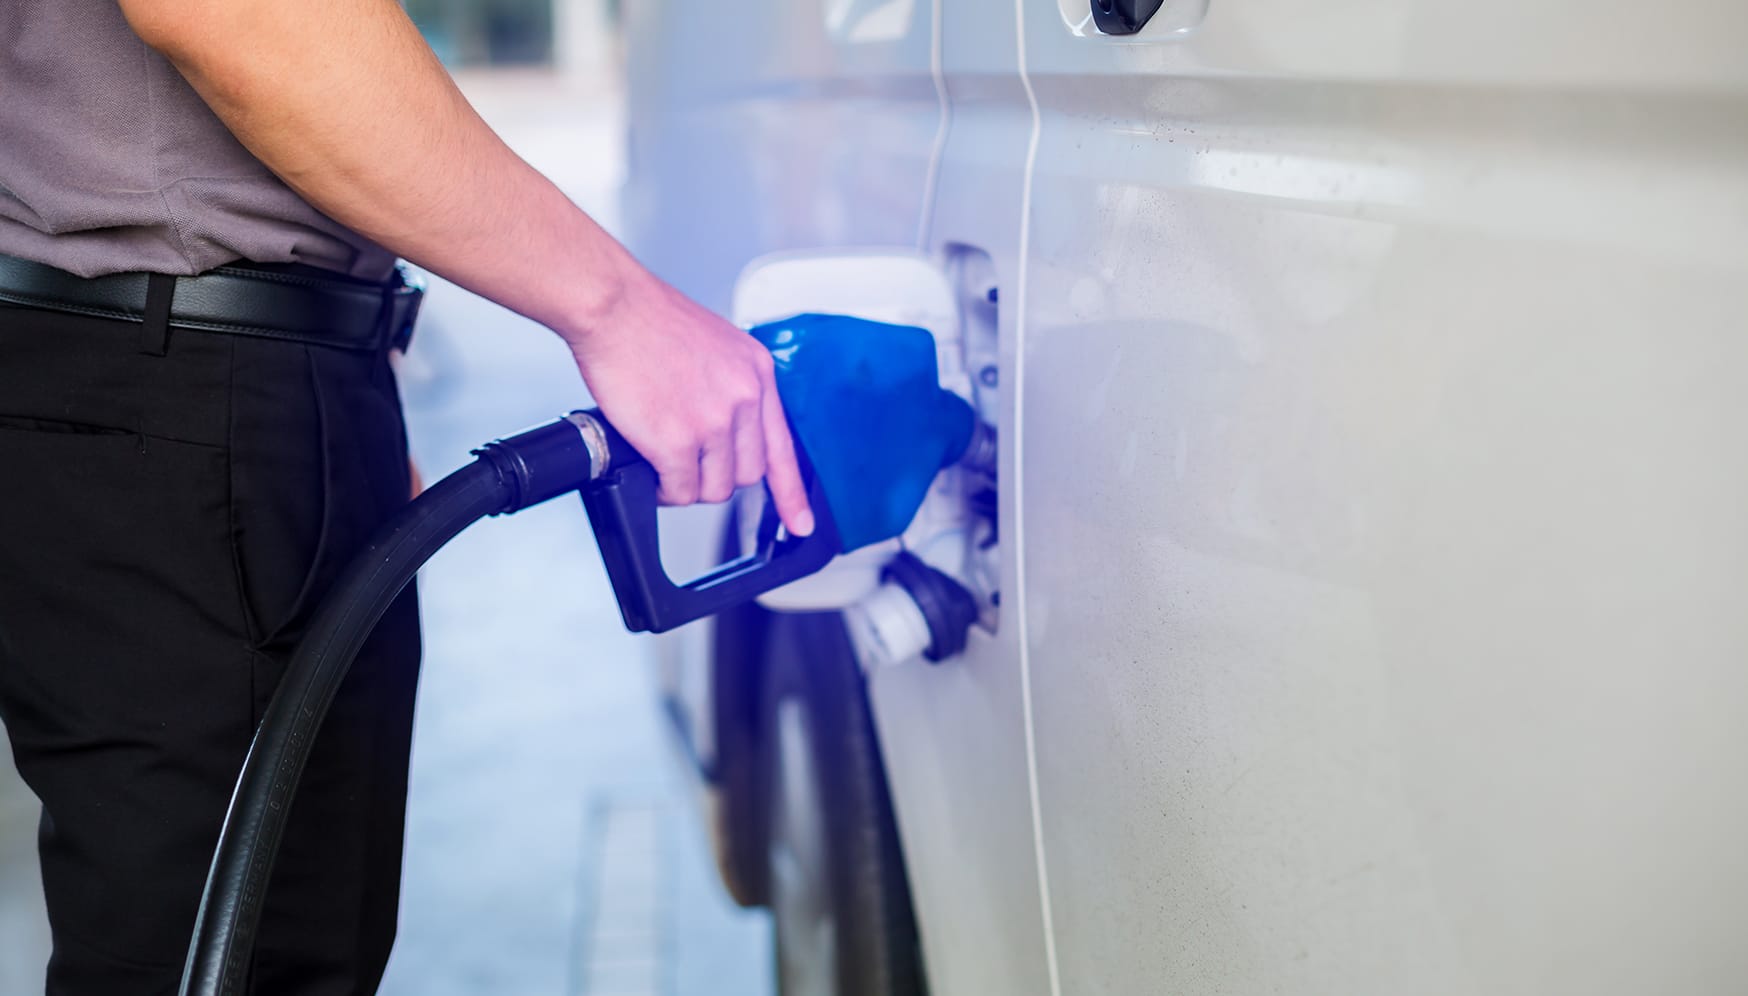 A person pumping fuel into a vehicle